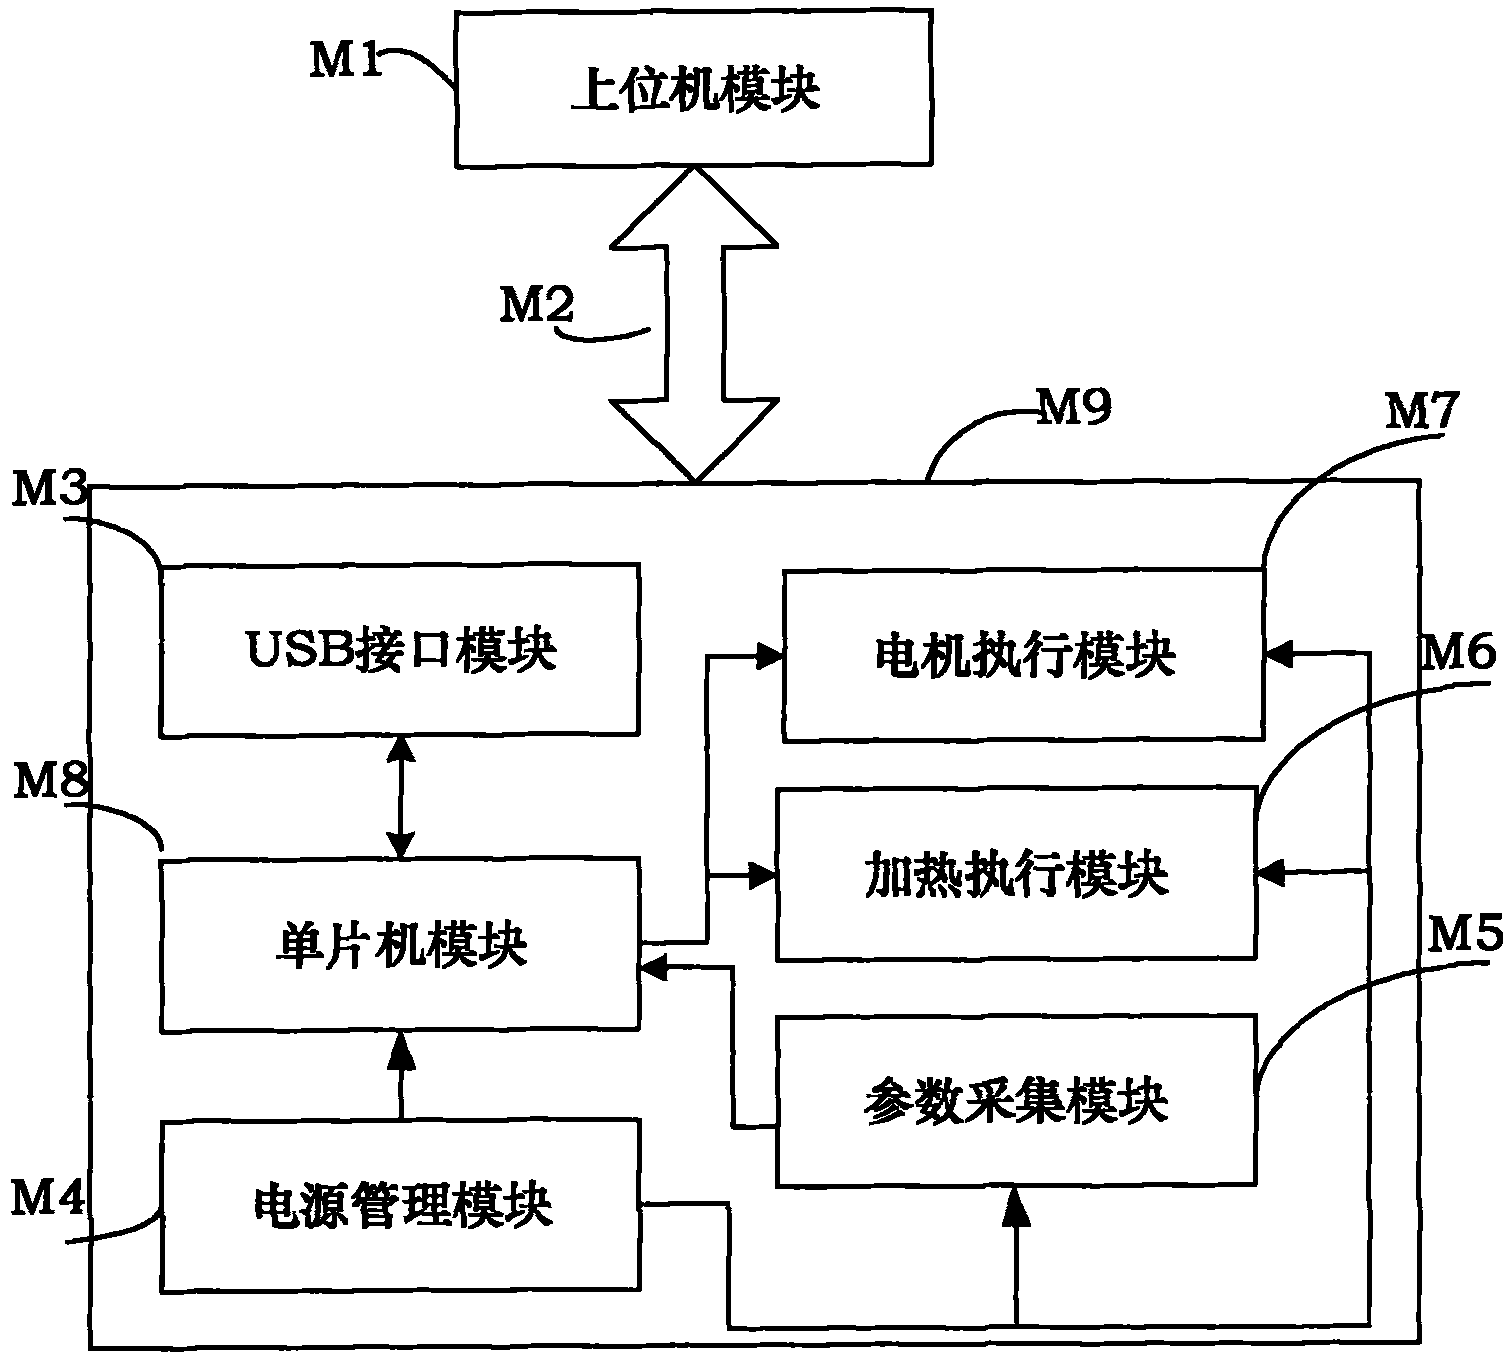 Man-machine interactive food processing control device capable of preprogramming